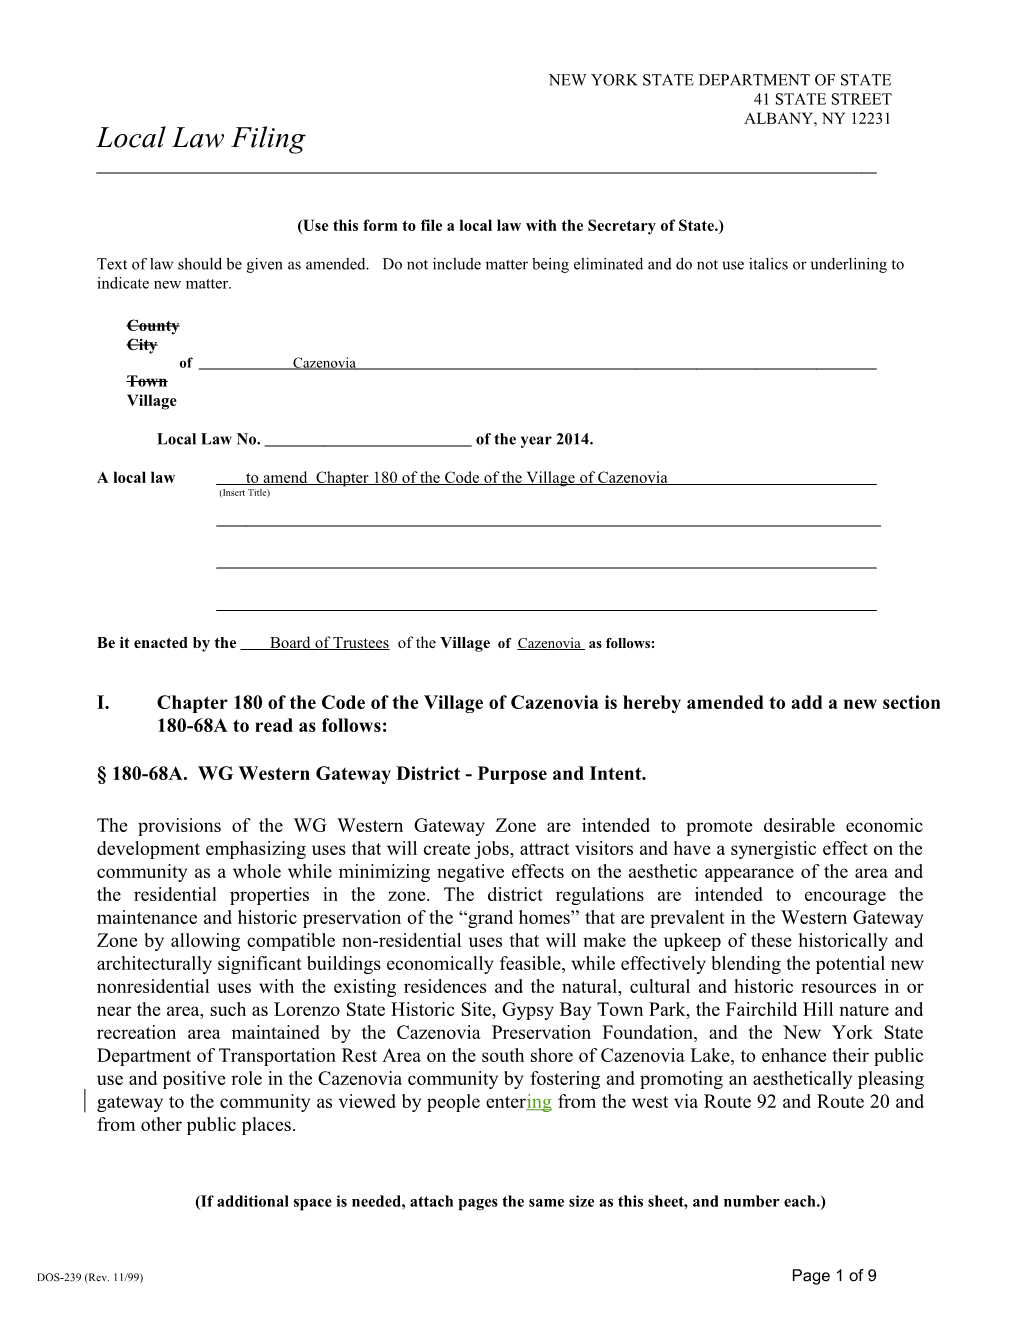 Use This Form to File a Local Law with the Secretary of State.